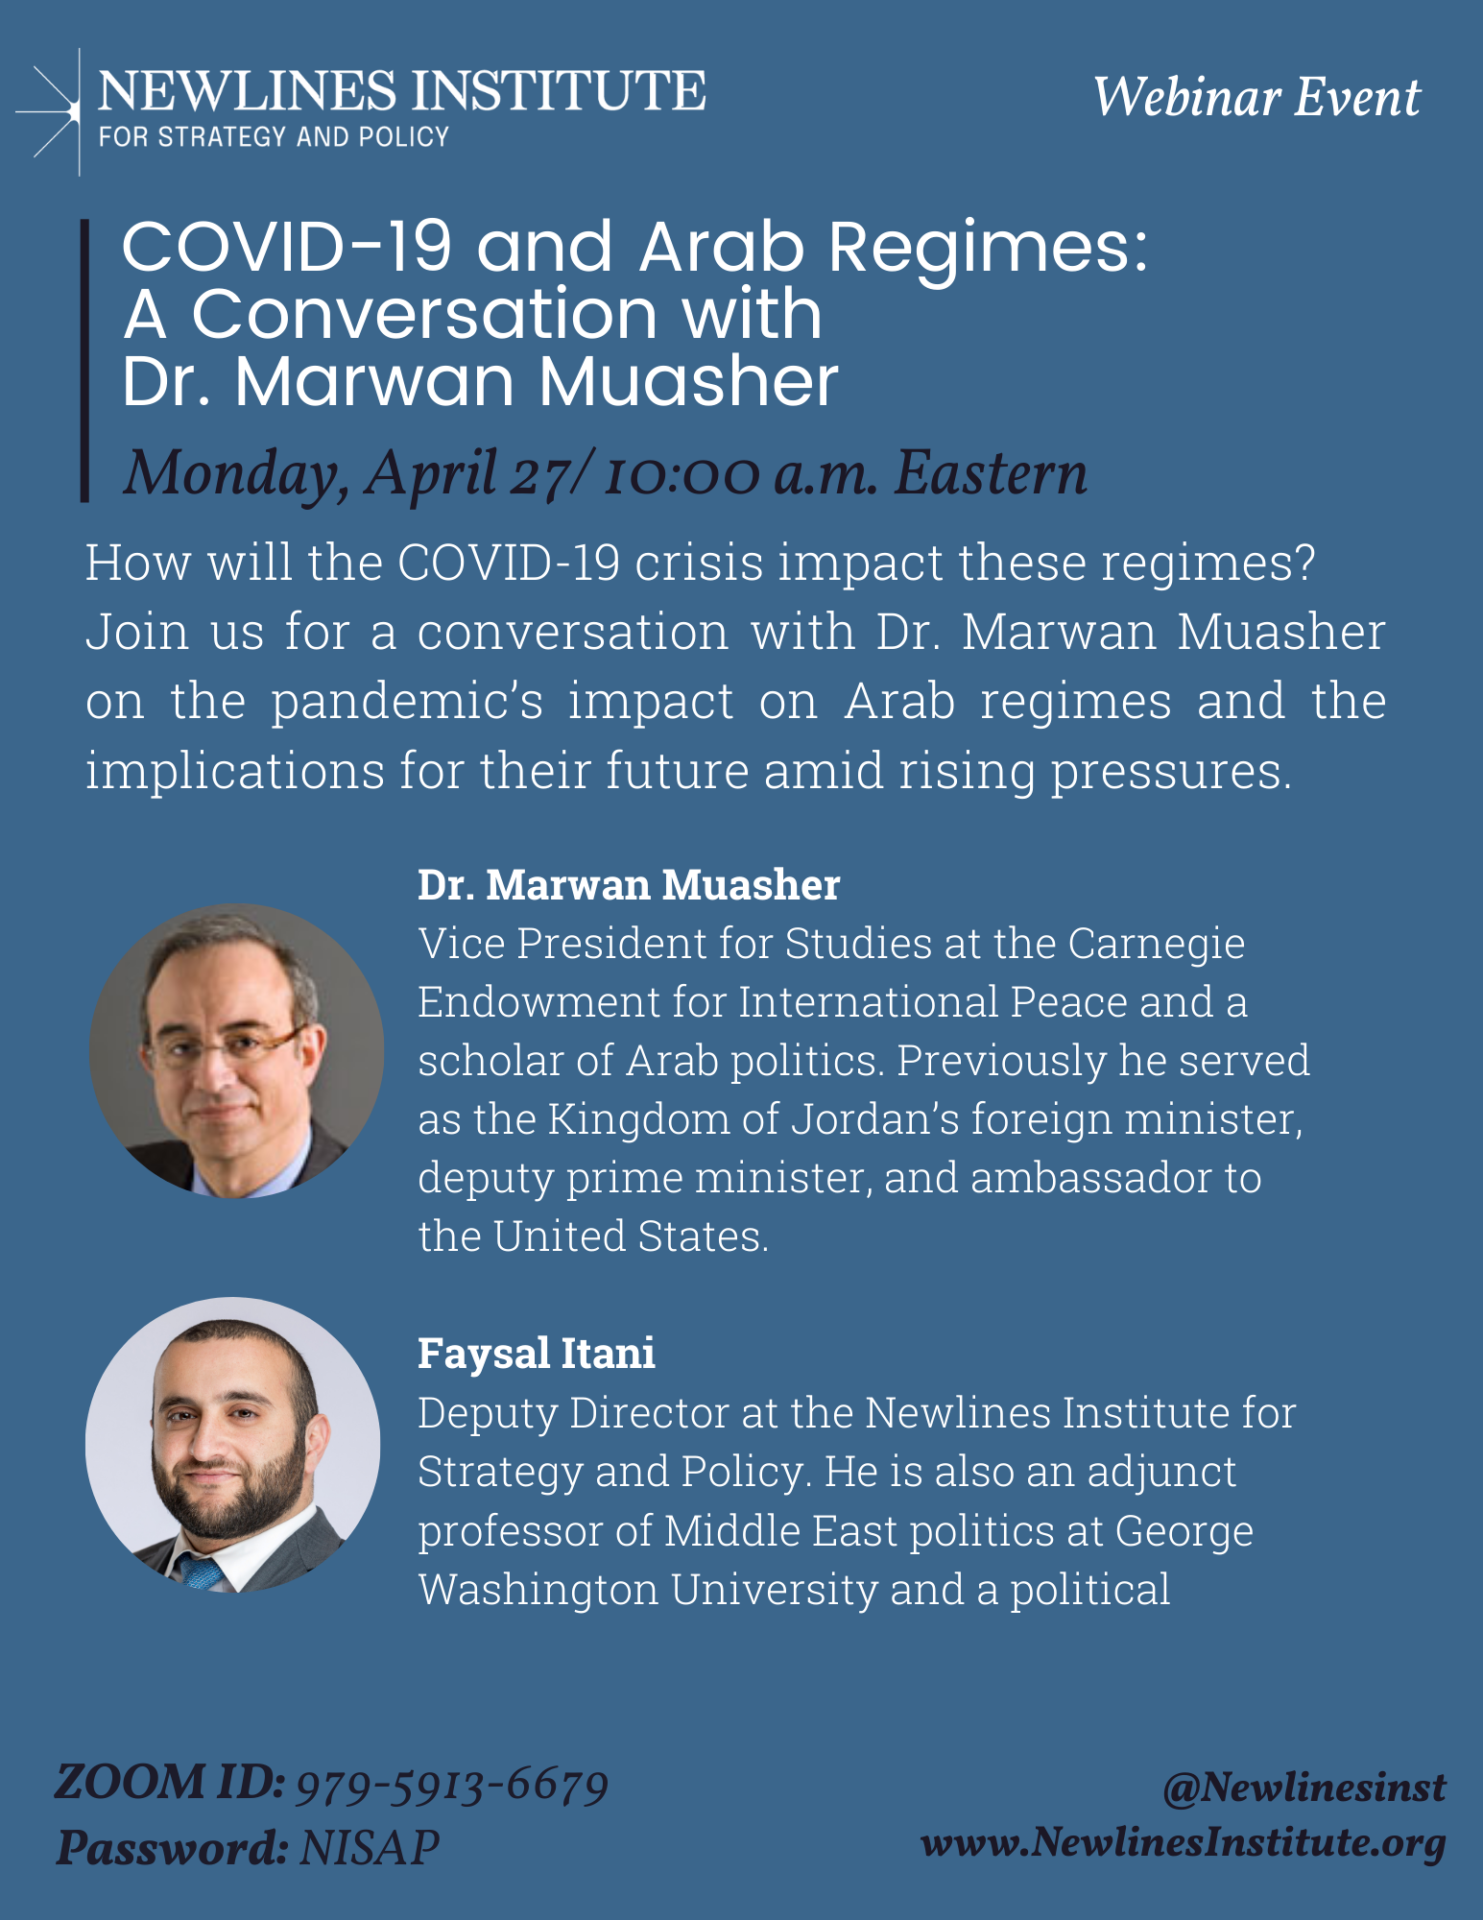 COVID-19 and Arab Regimes: A Conversation with Dr. Marwan Muasher